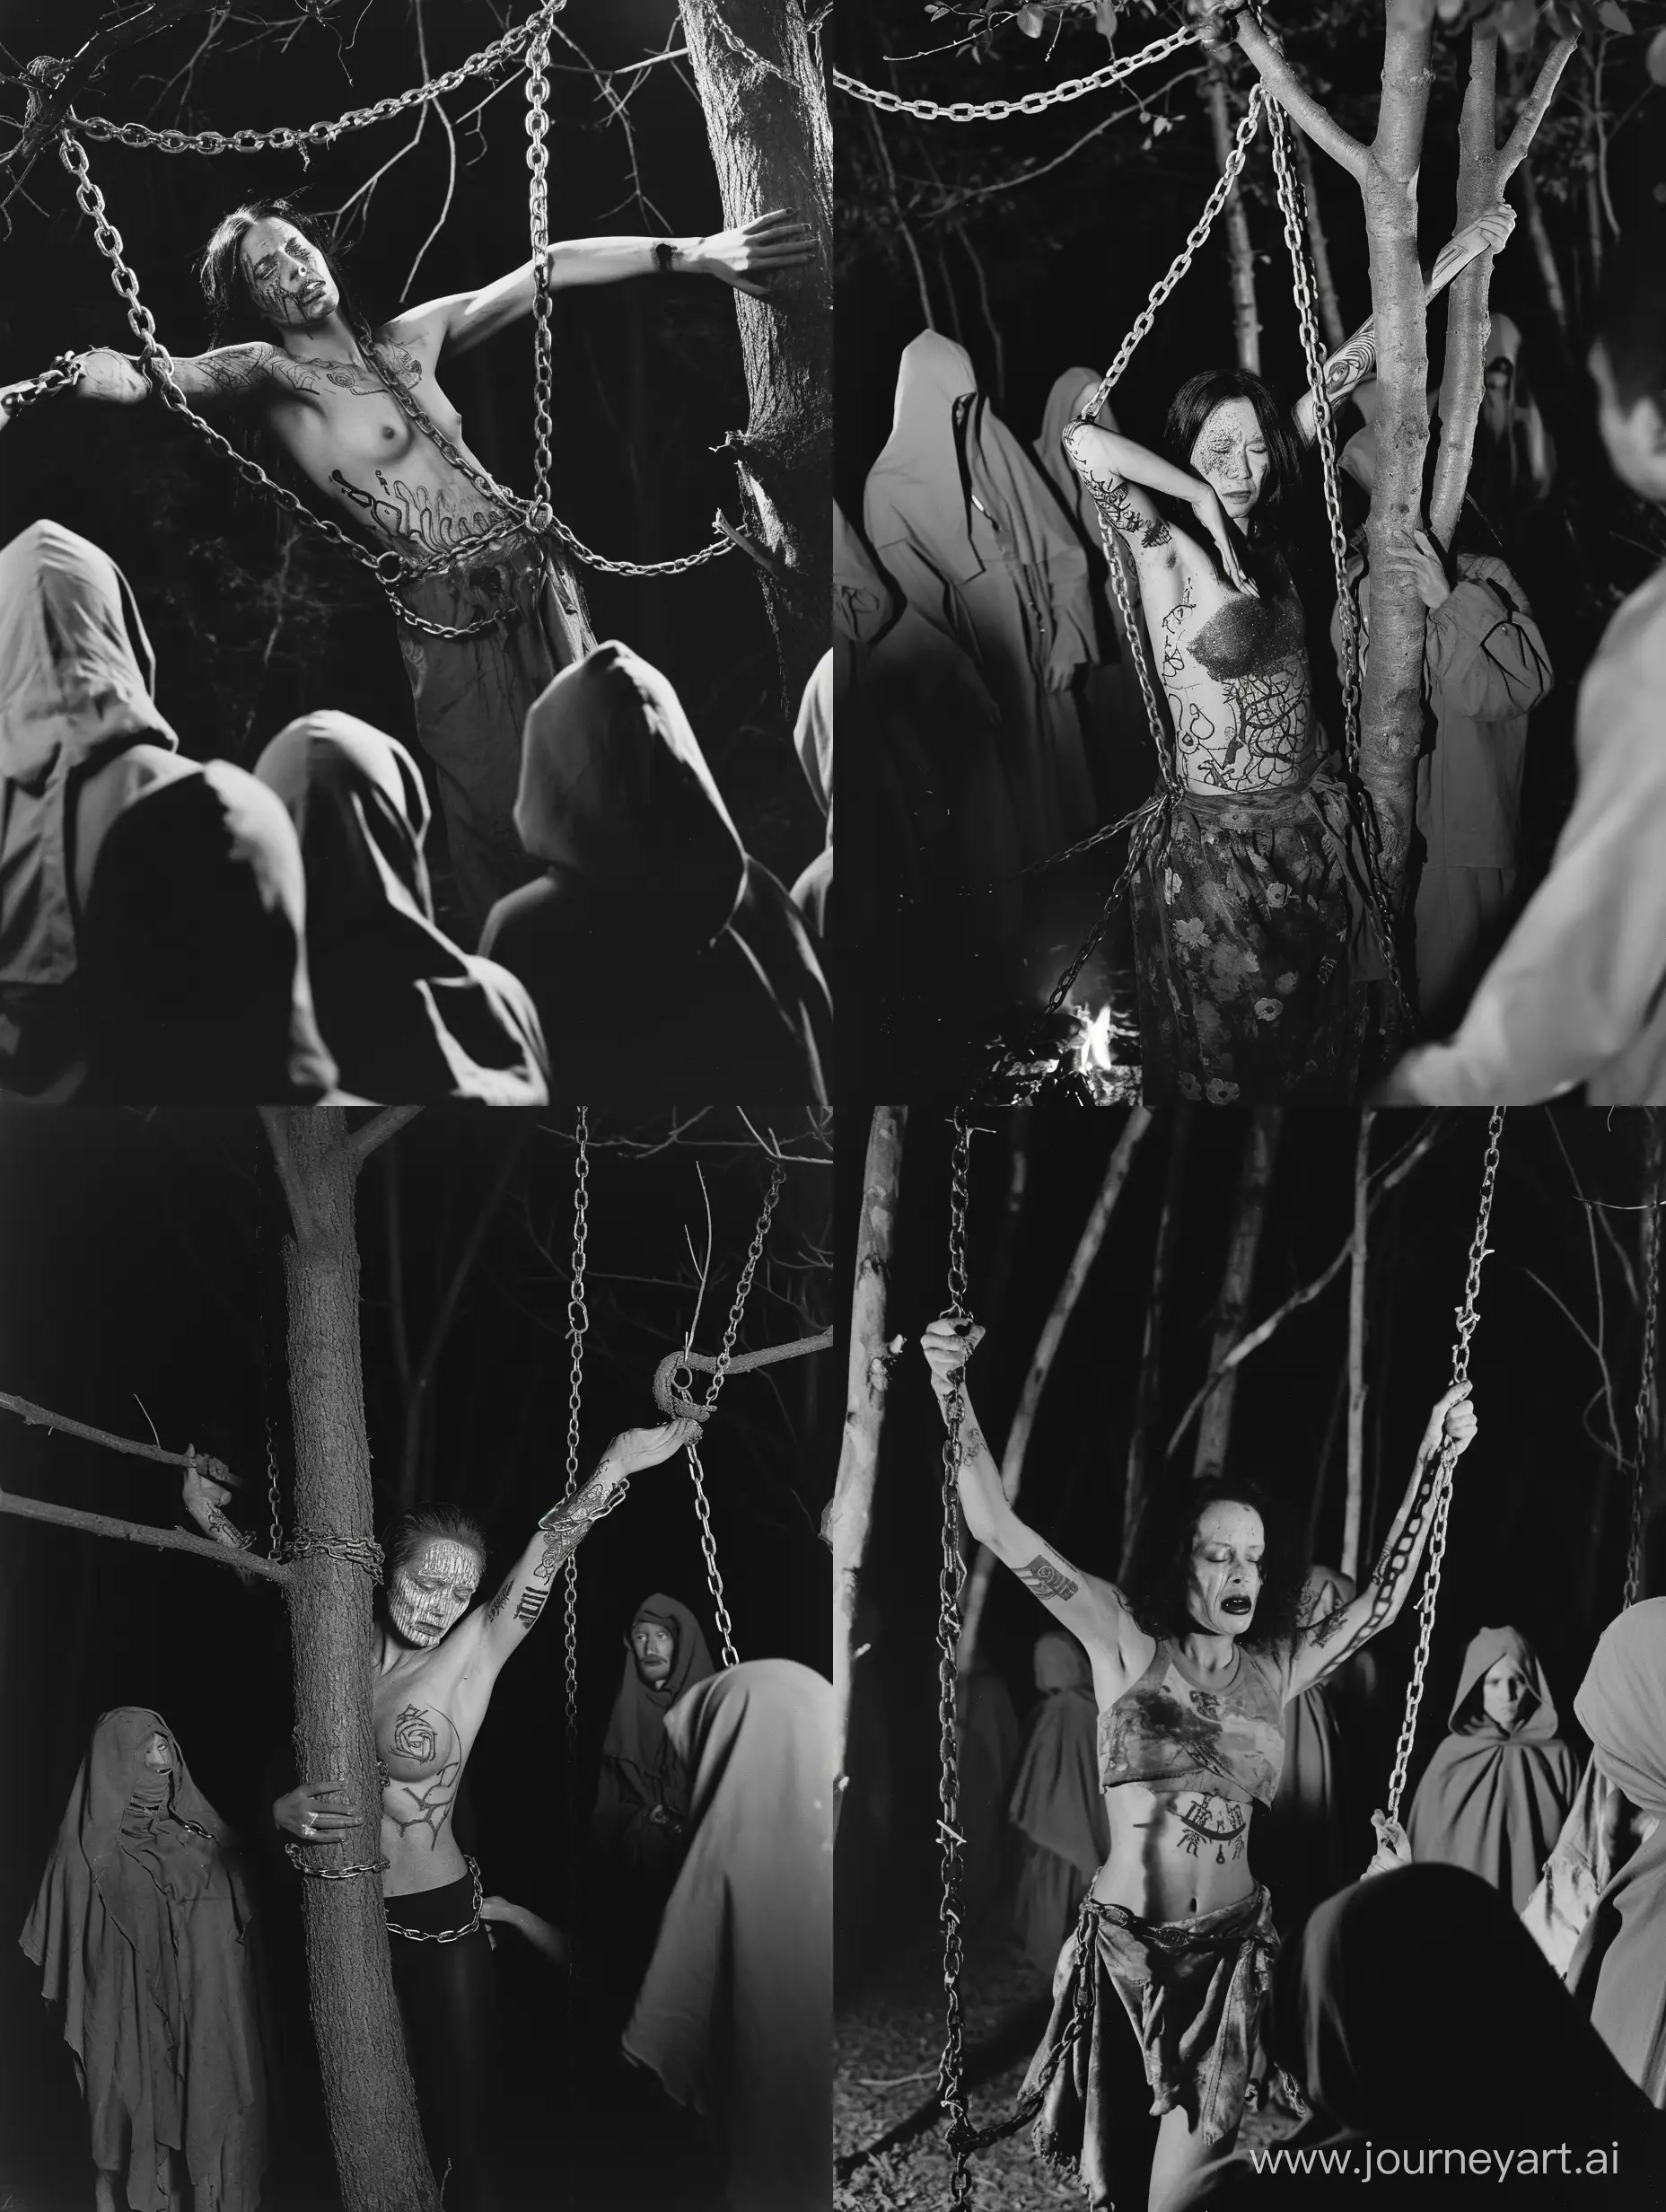 grayscale photo of a woman in a minimalistic forest, an ominous and unsettling scene unfolds, tear-stained face, body adorned with ominous tattoos. Her arms, stretched open and bound with chains to tree branches, chains tightly securing her in a vulnerable position, while hooded figures, gather around her, participating in a mysterious and unsettling ritual. The photo is captured using Fujifilm Provia film, enhancing the vividness of colors and contrasts, as the night scene is illuminated by a flickering campfire, casting eerie shadows, adding to the sense of foreboding. The forest serves as the backdrop for this hike core ritual, its minimalistic beauty contrasting with the intensity of the scene, creating a chilling ambiance that evokes both fascination and unease. Unlikely collaborators: Marina Abramović, the performance artist exploring the limits of the body, Sally Mann, the photographer capturing haunting and introspective images, Gareth Pugh, the fashion designer known for his dark and theatrical aesthetics, Ari Aster, the filmmaker specializing in atmospheric and disturbing narratives, David Tibet, the musician and artist delving into esoteric and ritualistic themes.